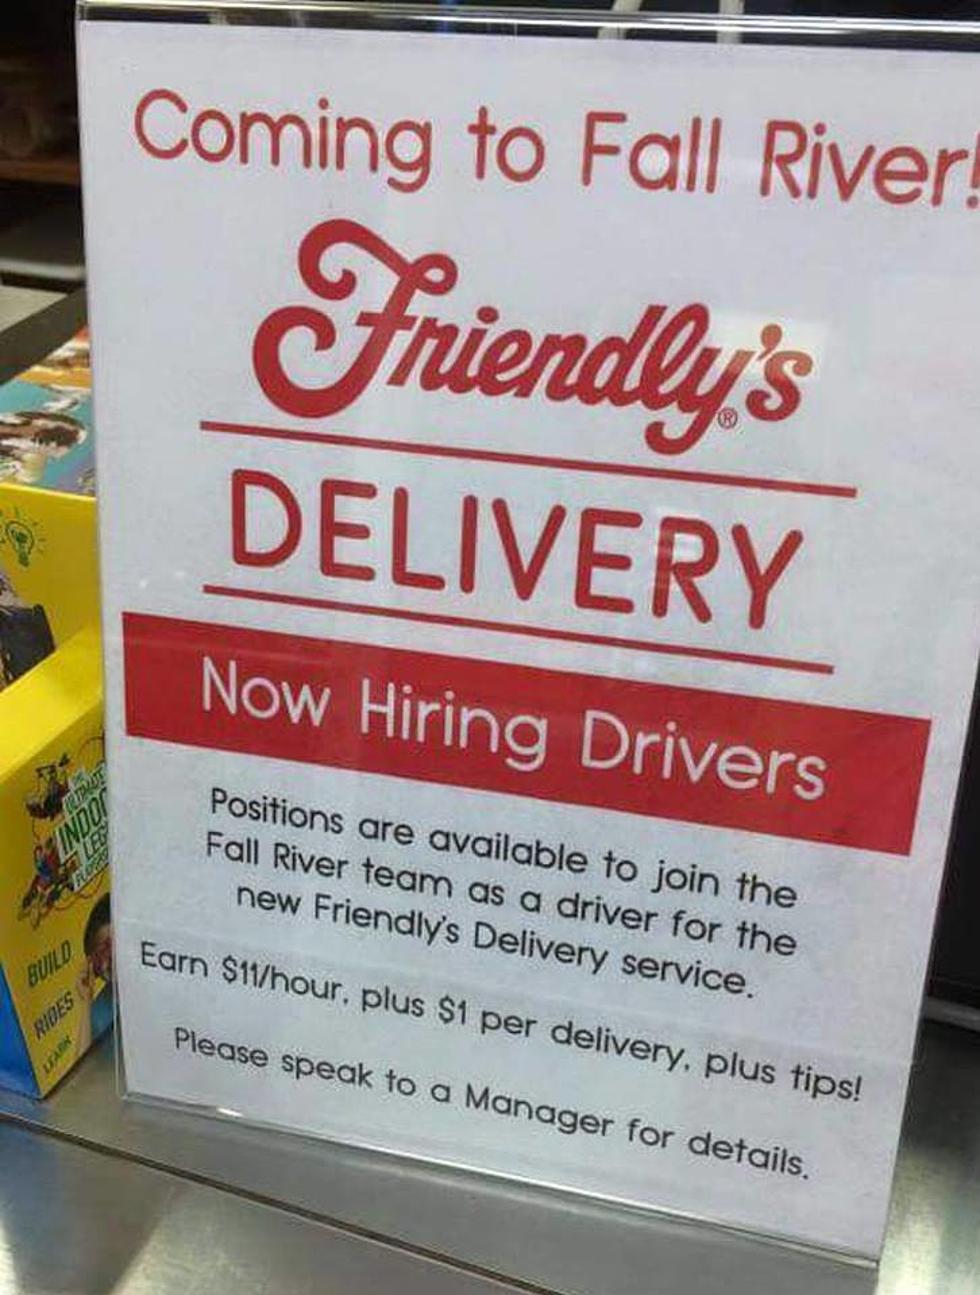 Fall River Friendly’s Hiring Delivery Drivers